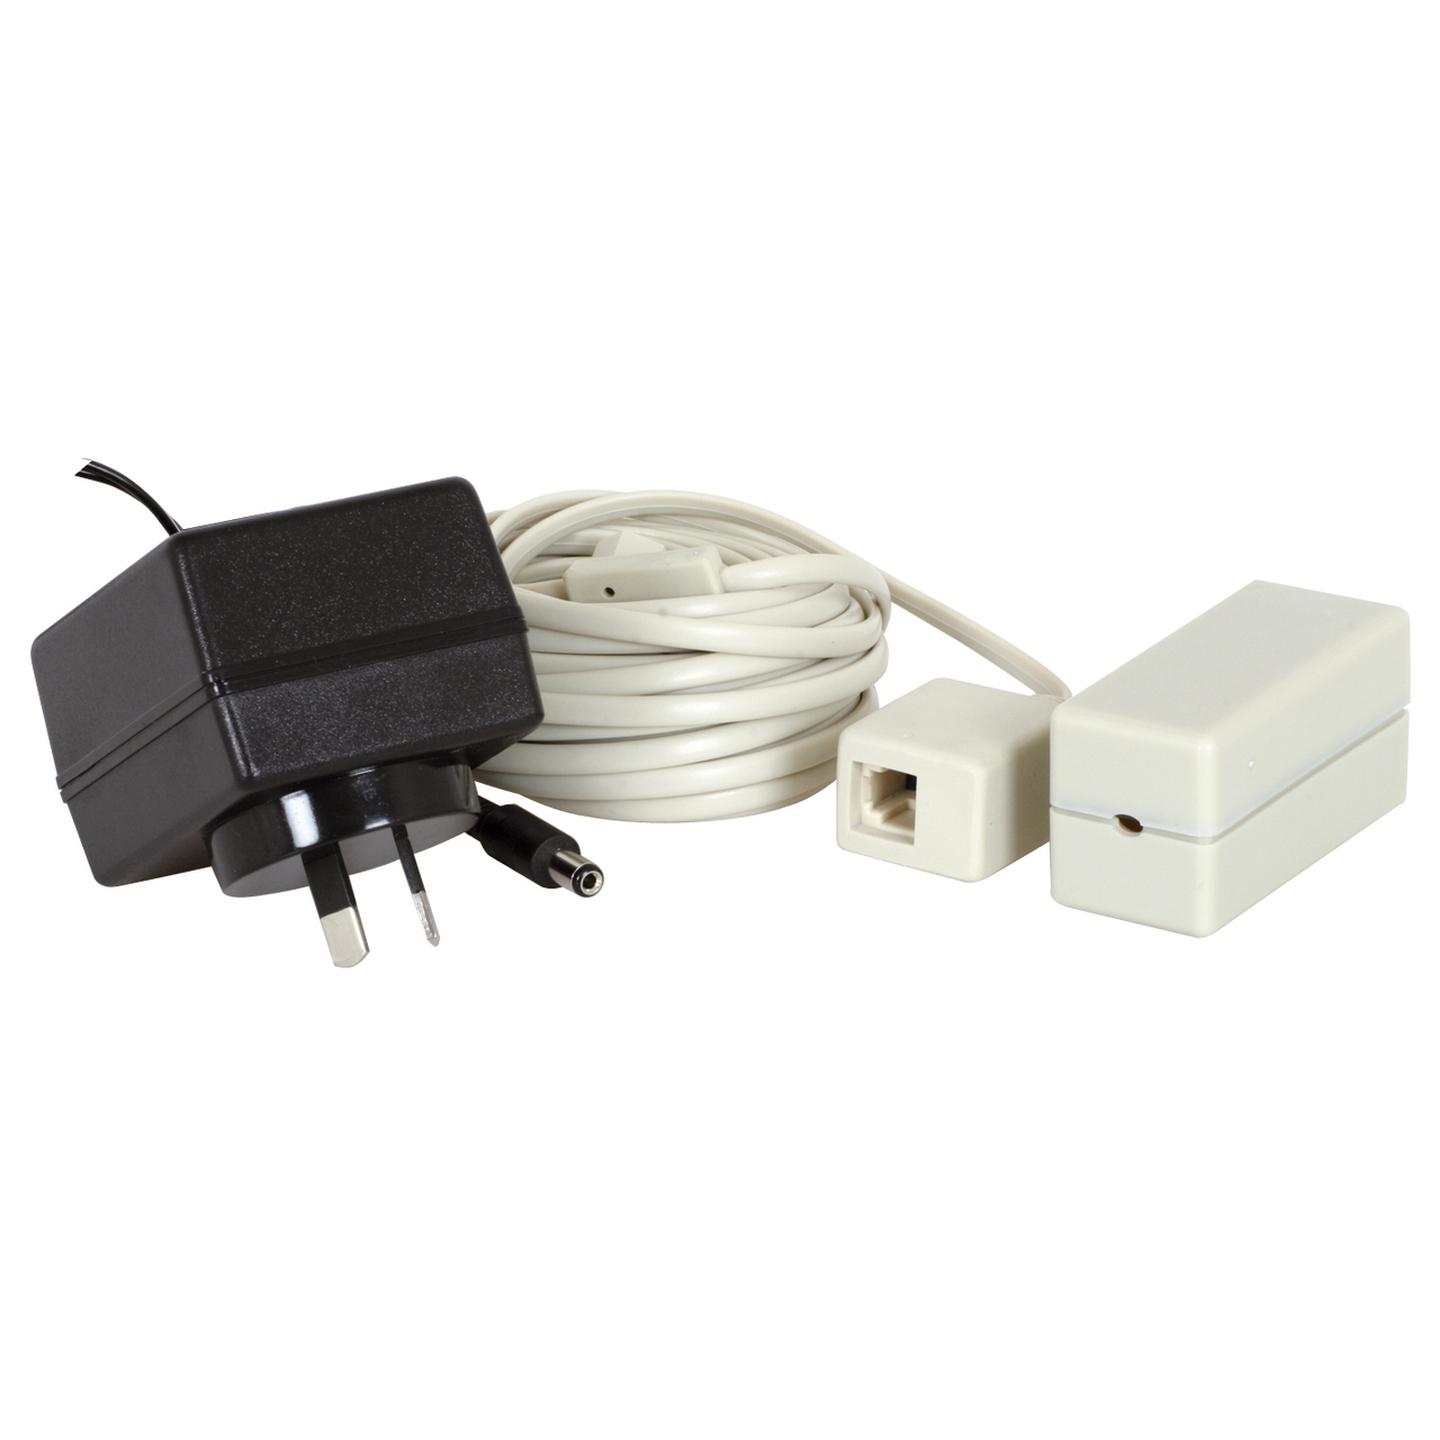 AC/DC Transmitter Adaptor for Home Weather Station